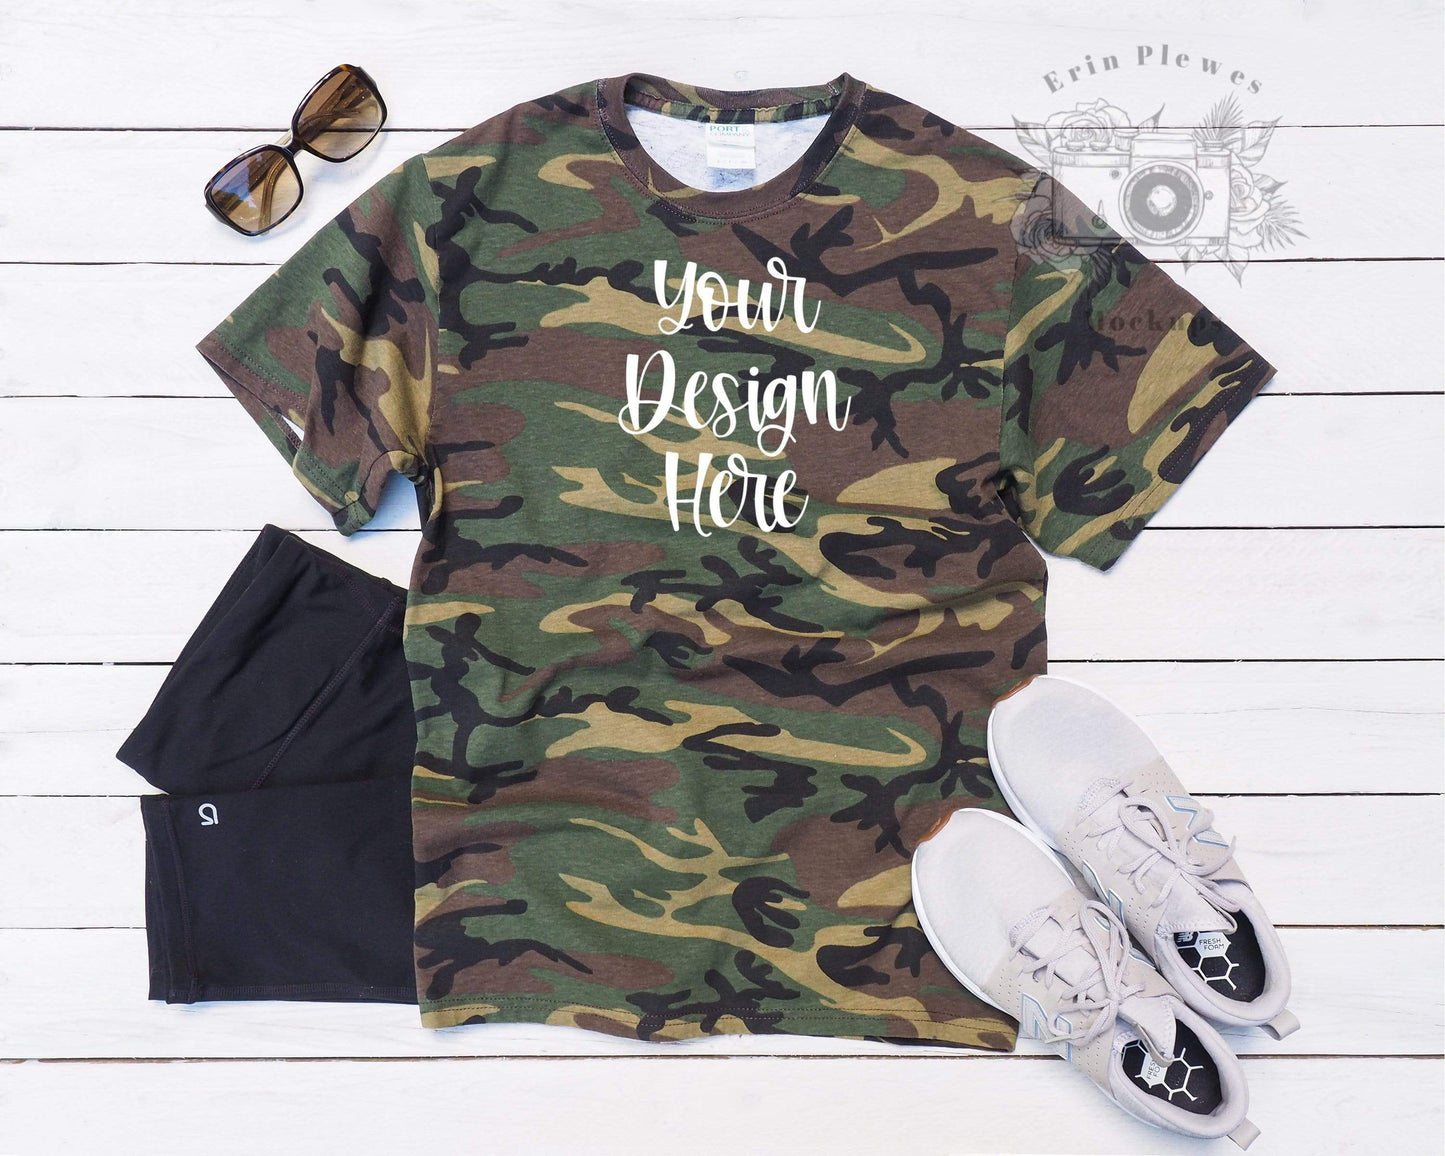 Erin Plewes Mockups T Shirt Mockup Camo, Green Camouflage Tshirt Mockup for Styled Stock Photos, Instant Digital Download Jpeg Template